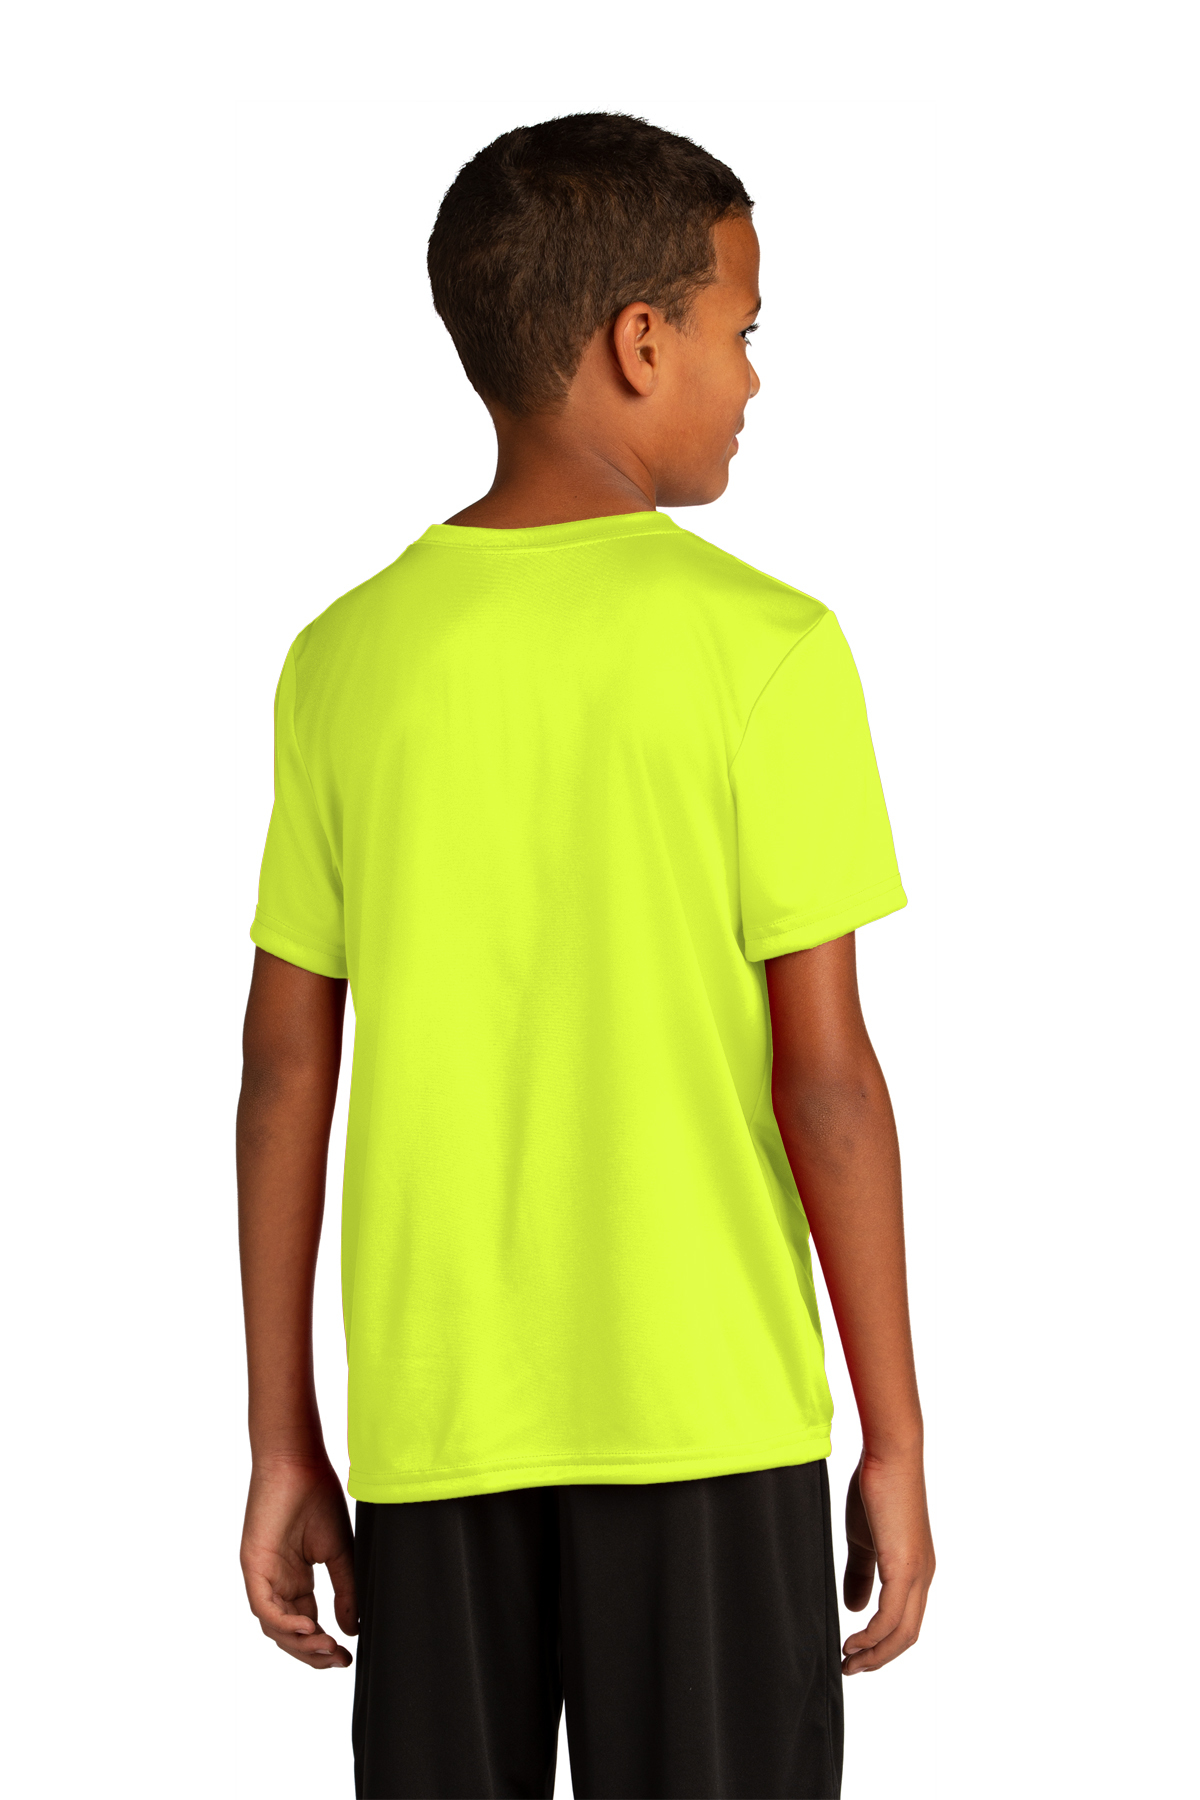 Sport-Tek Tee | Re-Compete SanMar Product PosiCharge Youth |